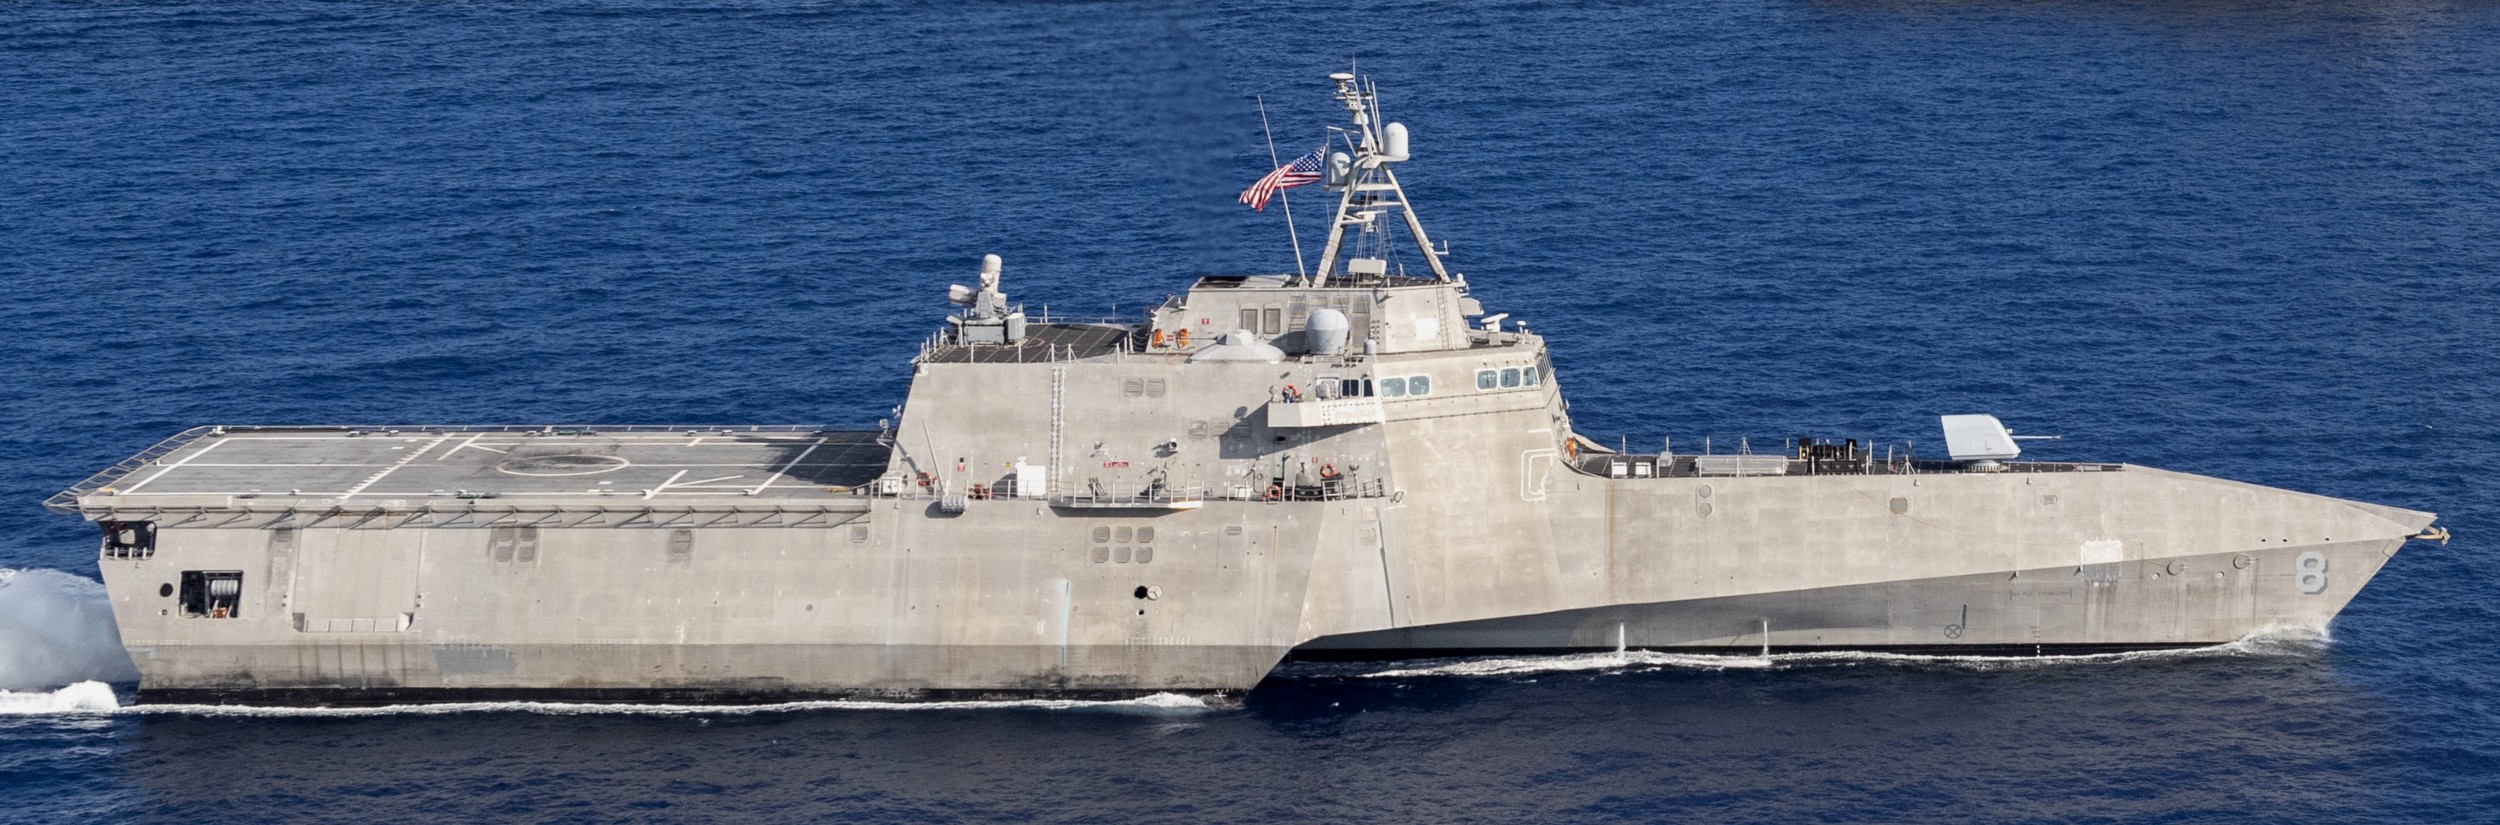 lcs-8 uss montgomery independence class littoral combat ship us navy 19